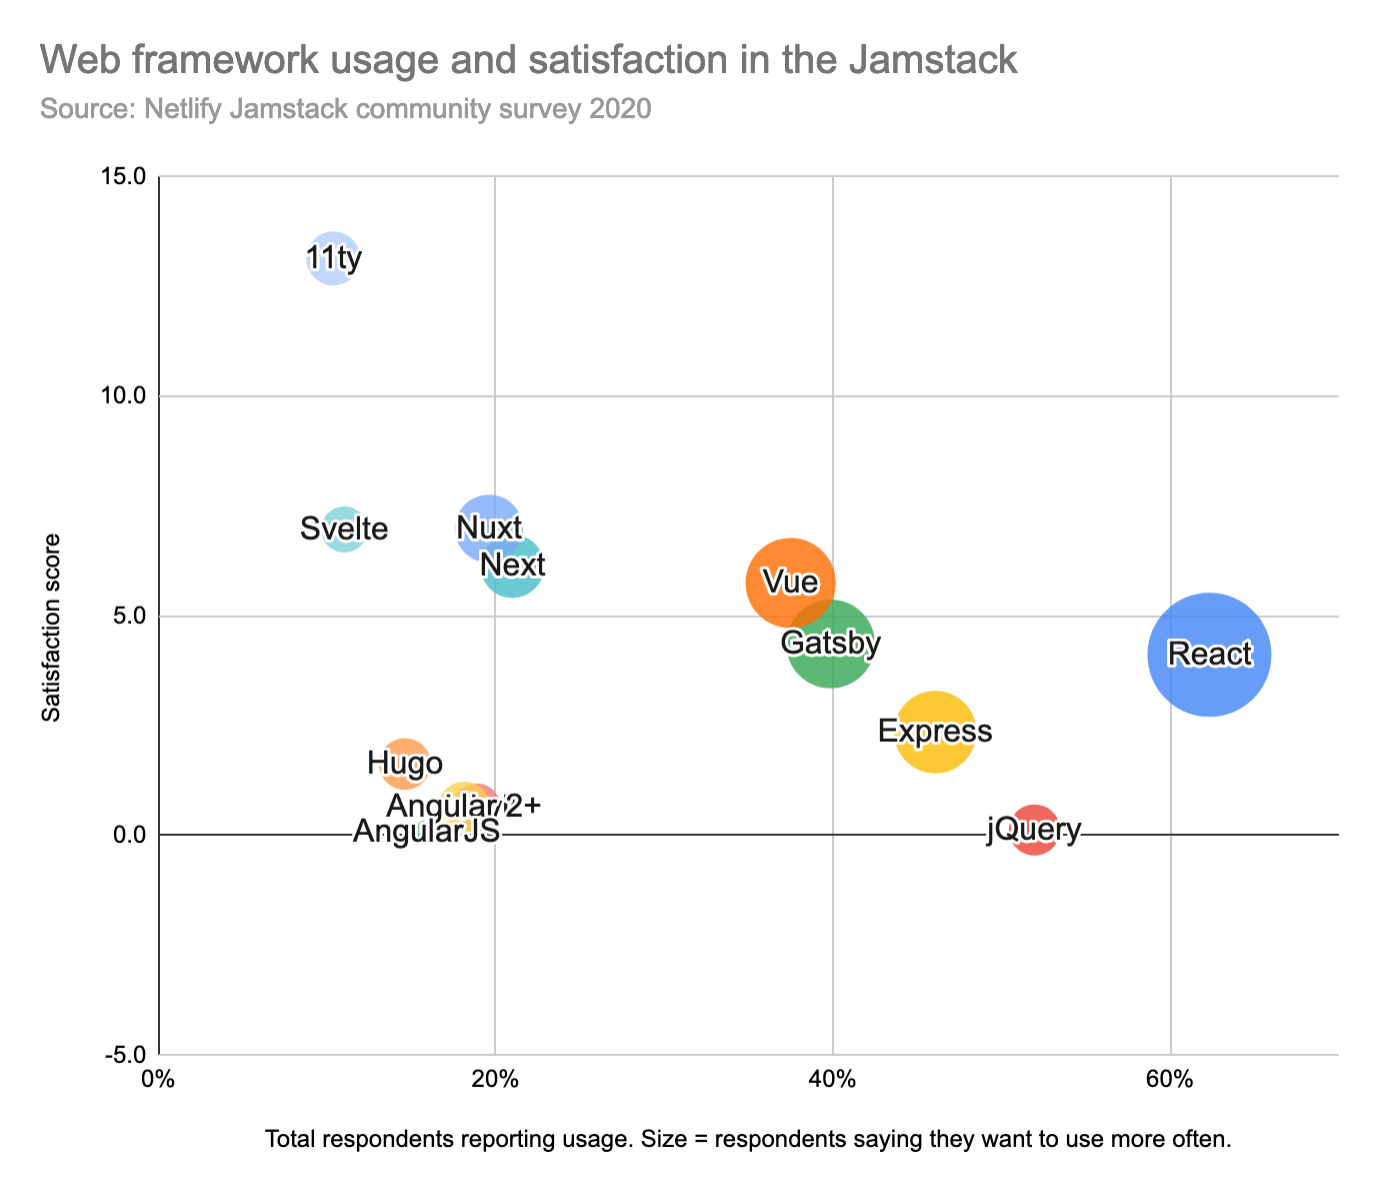 A bubble chart showing web frameworks. On the horizontal axis, total respondents reporting usage, they are ordered as: React (63%), then jQuery, express, Gatsby, Vue, Next, Nuxt, AngularJS, Angular 2+, Huge, Svelte 11ty (11%). On the vertical axis, satisfaction score, they are ordered: 11ty, Nuxt, Svelte, Next, Vue, Gatsby, React, Express, Hugo, Angular 2+, jQuery, AngularJS.